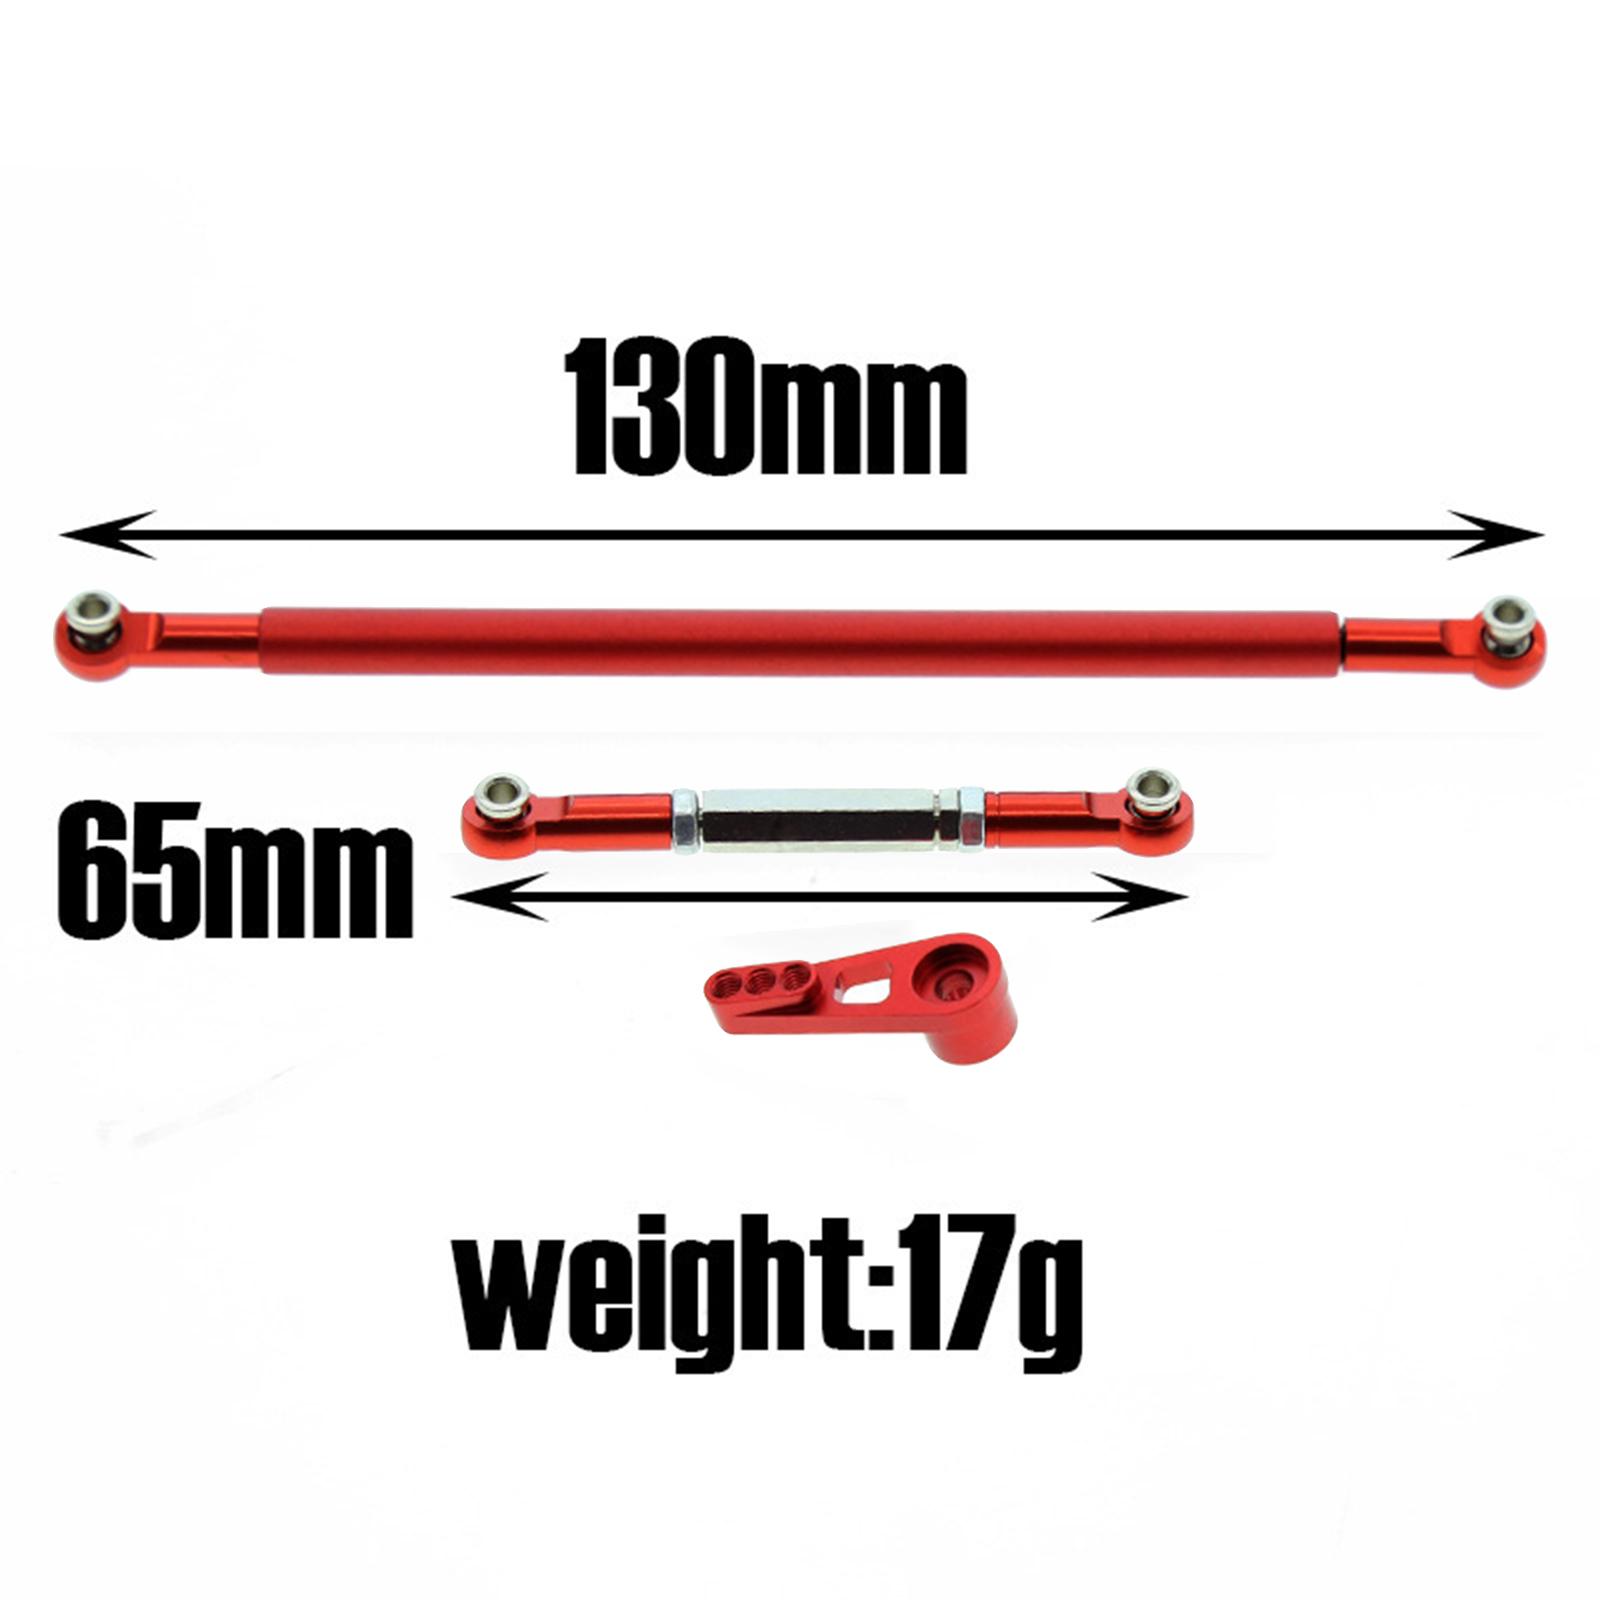 Metal Tie-Rod Steering Arm Servo Linkages For MN86S MN86 1:12 RC Car red